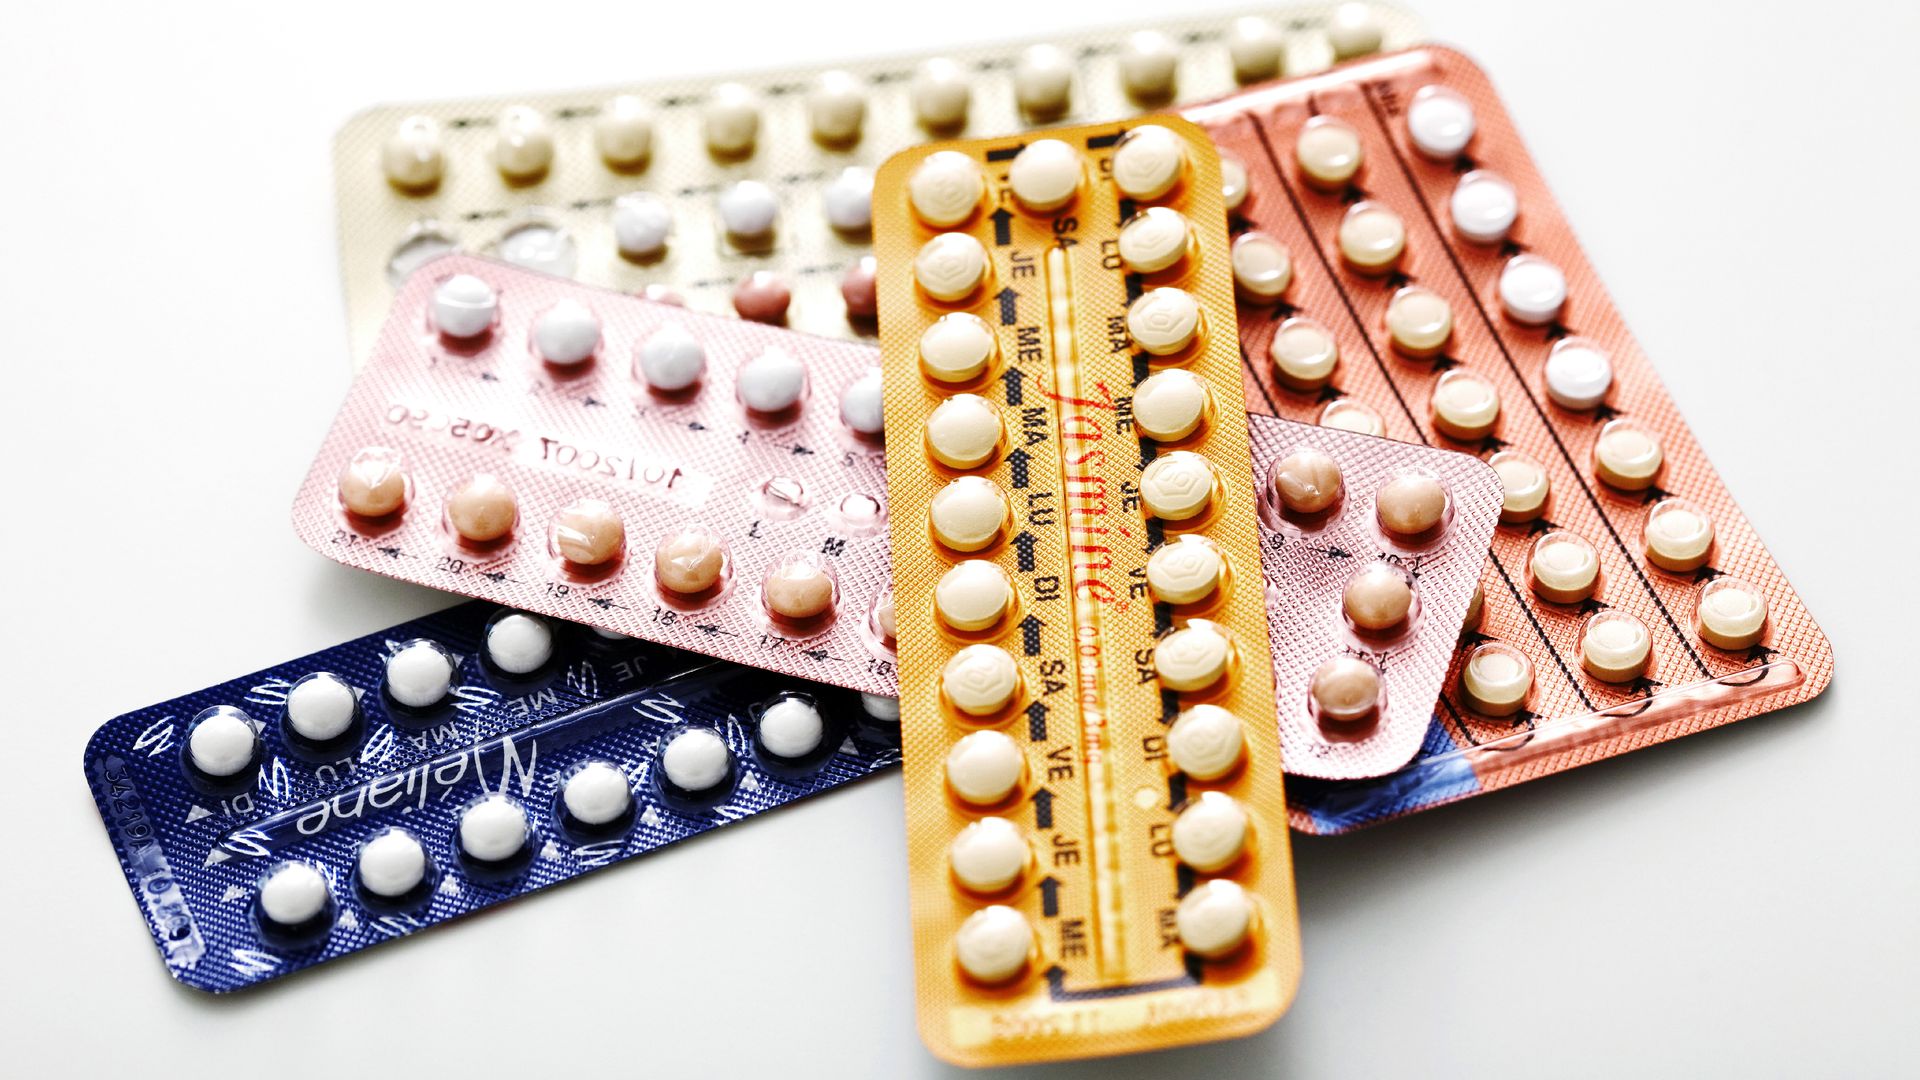 Birth control pills in multicolors in a stack.